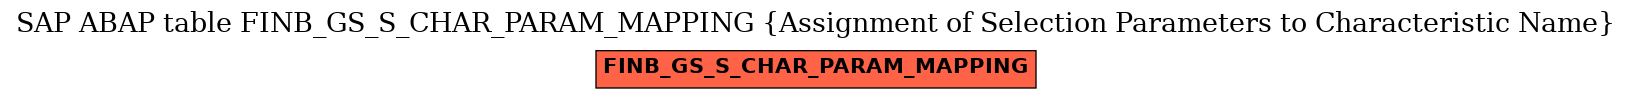 E-R Diagram for table FINB_GS_S_CHAR_PARAM_MAPPING (Assignment of Selection Parameters to Characteristic Name)